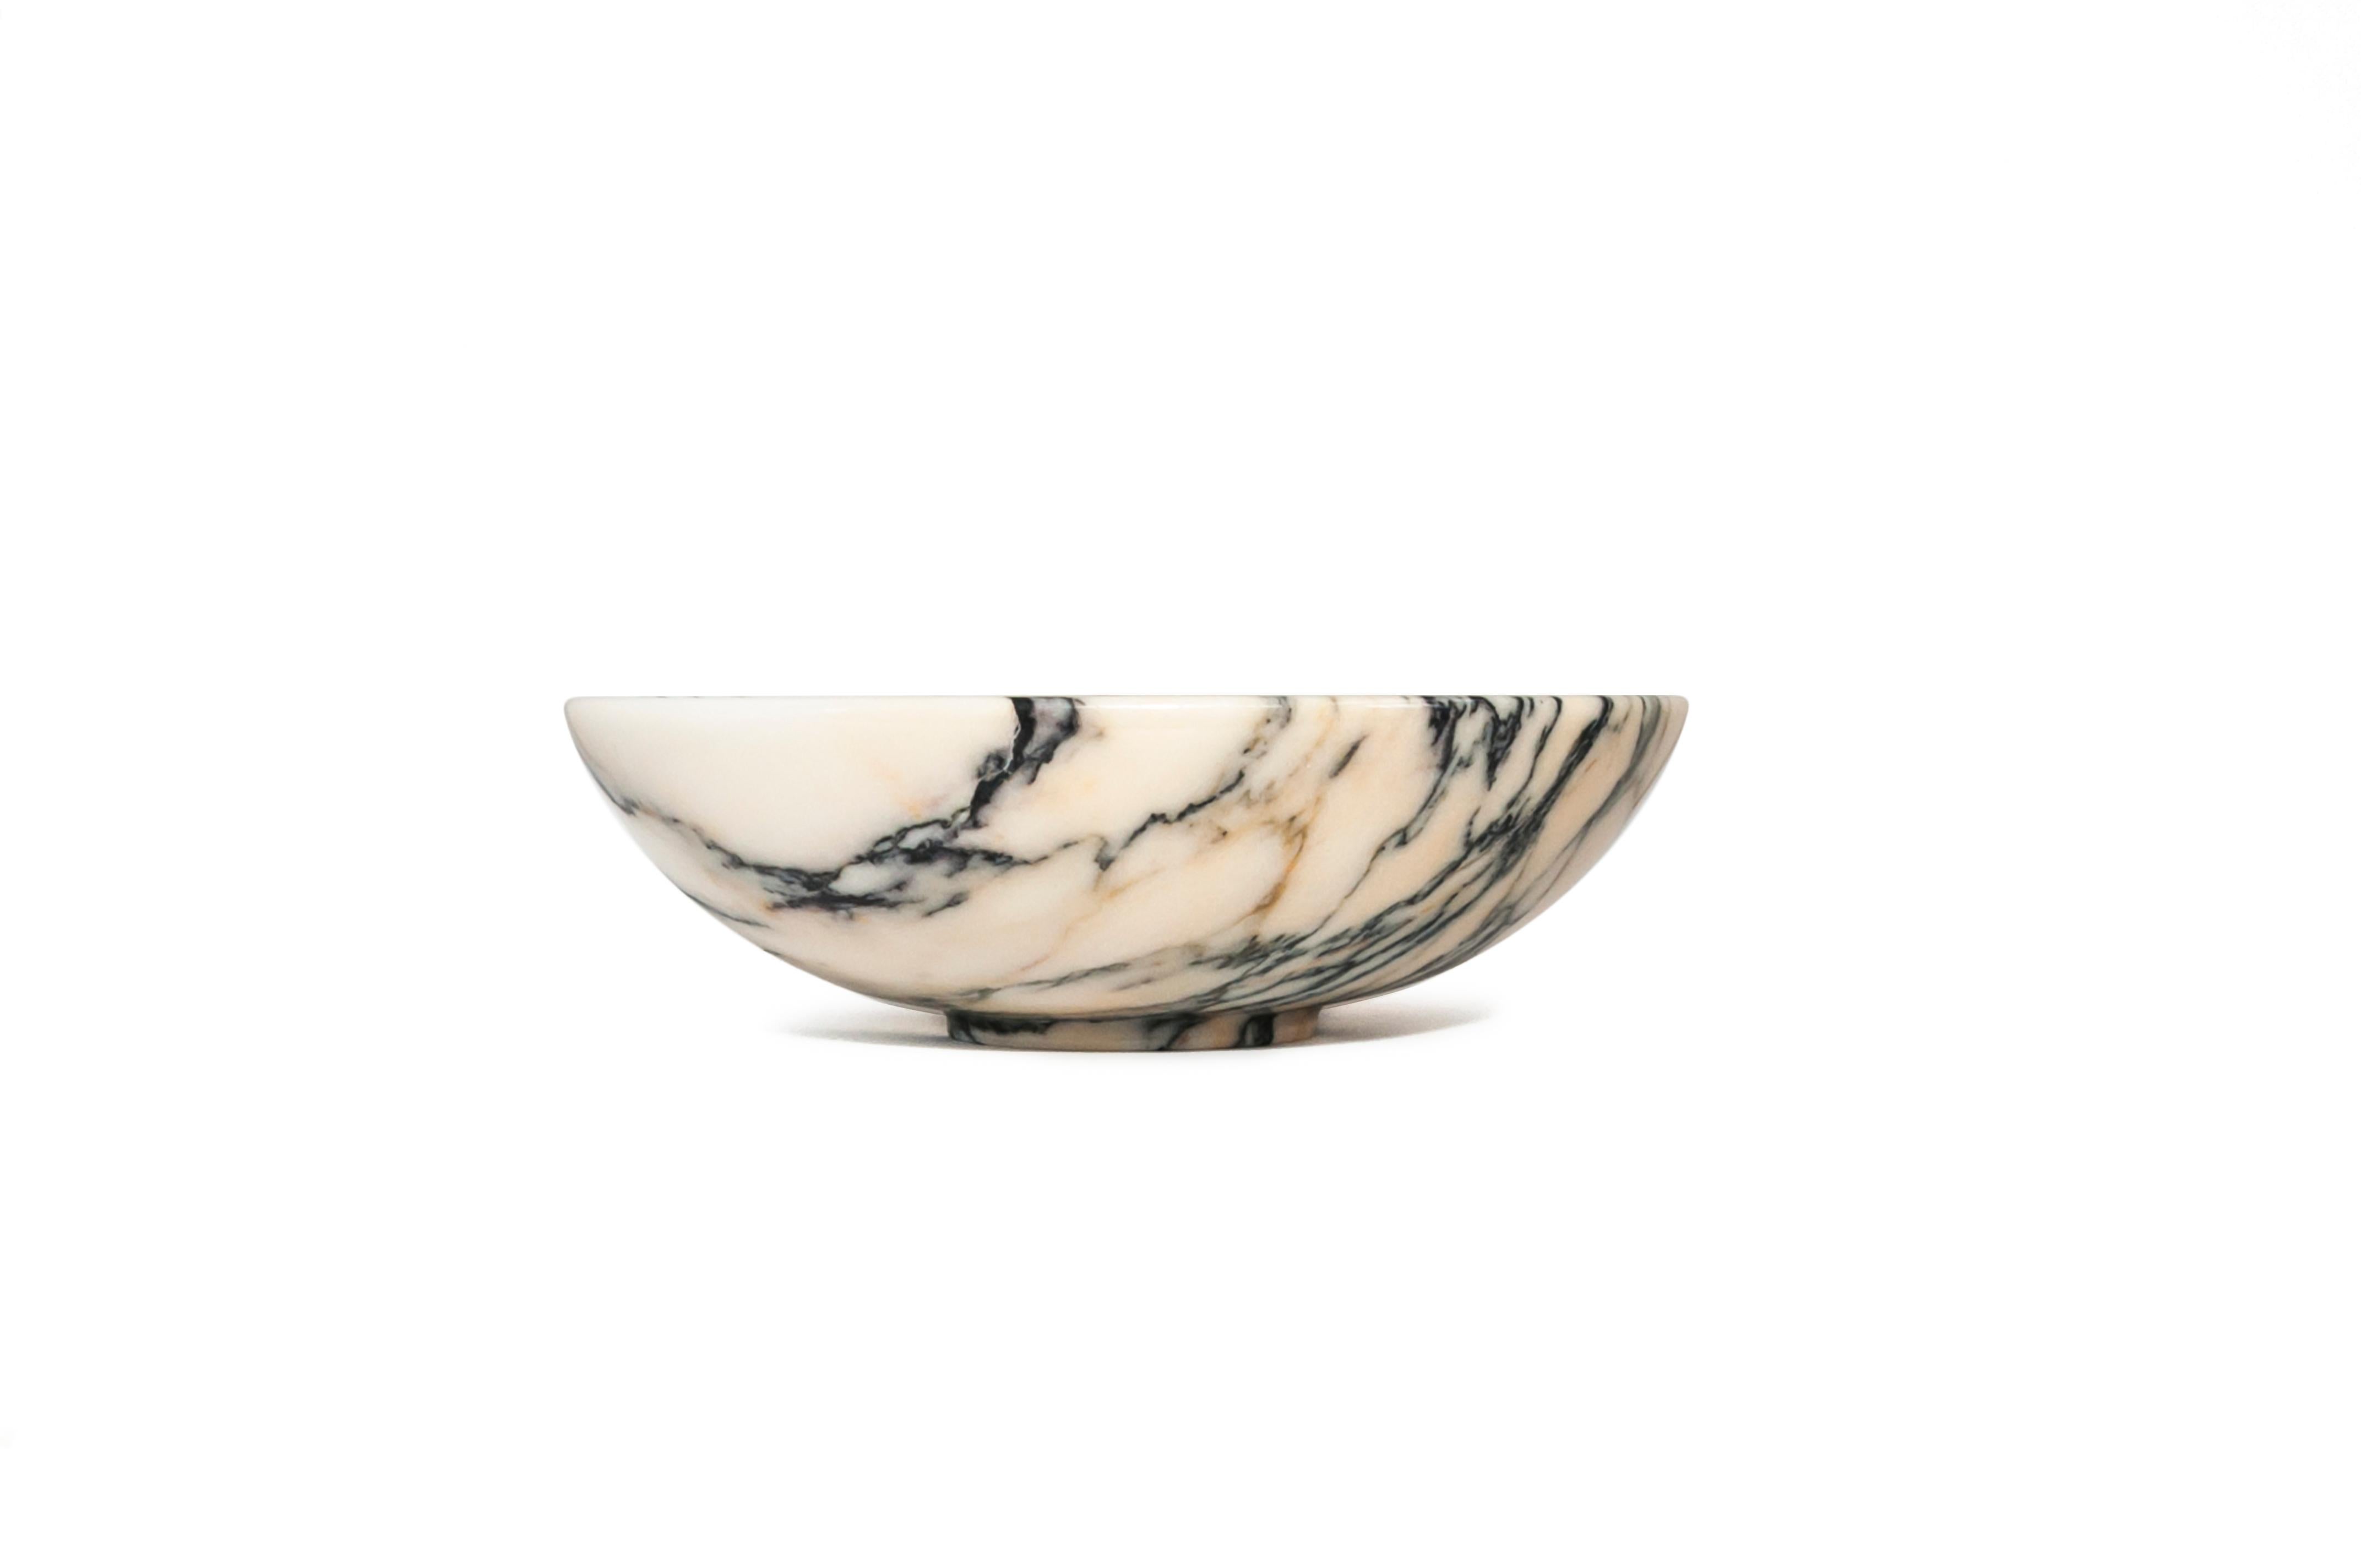 Big fruit bowl in Paonazzo marble, extracted and processed in Carrara, Italy. You have a 100% made in Italy product. Measures: 30 cm diameter.
It is ideal for fruit and to present food.
Each piece is in a way unique (every marble block is different